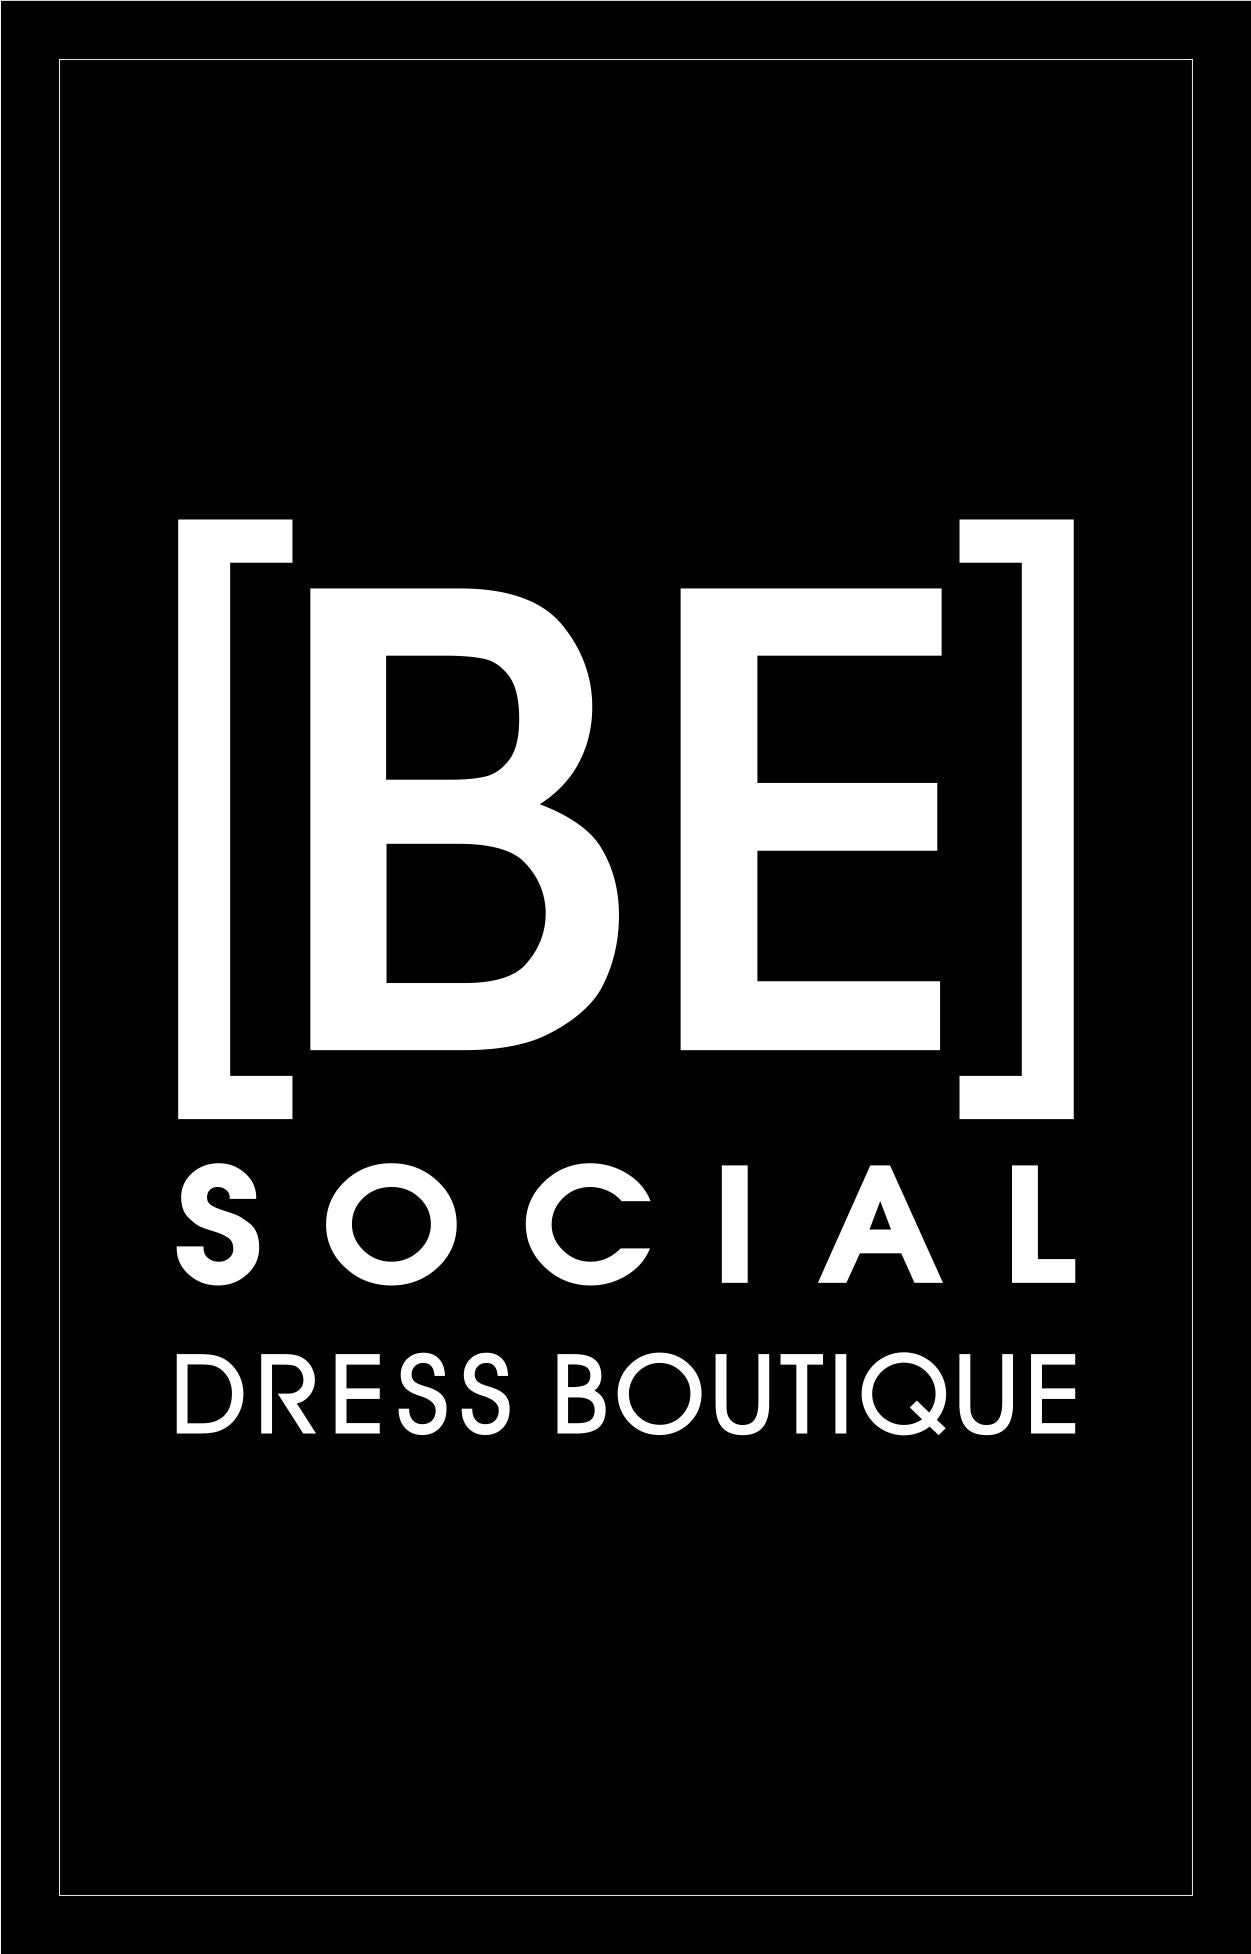 Be Social Dress Boutique Fitting1 Final 2.67 X 4.17 Luxury Berber Inlay - The Personalized Doormats Company